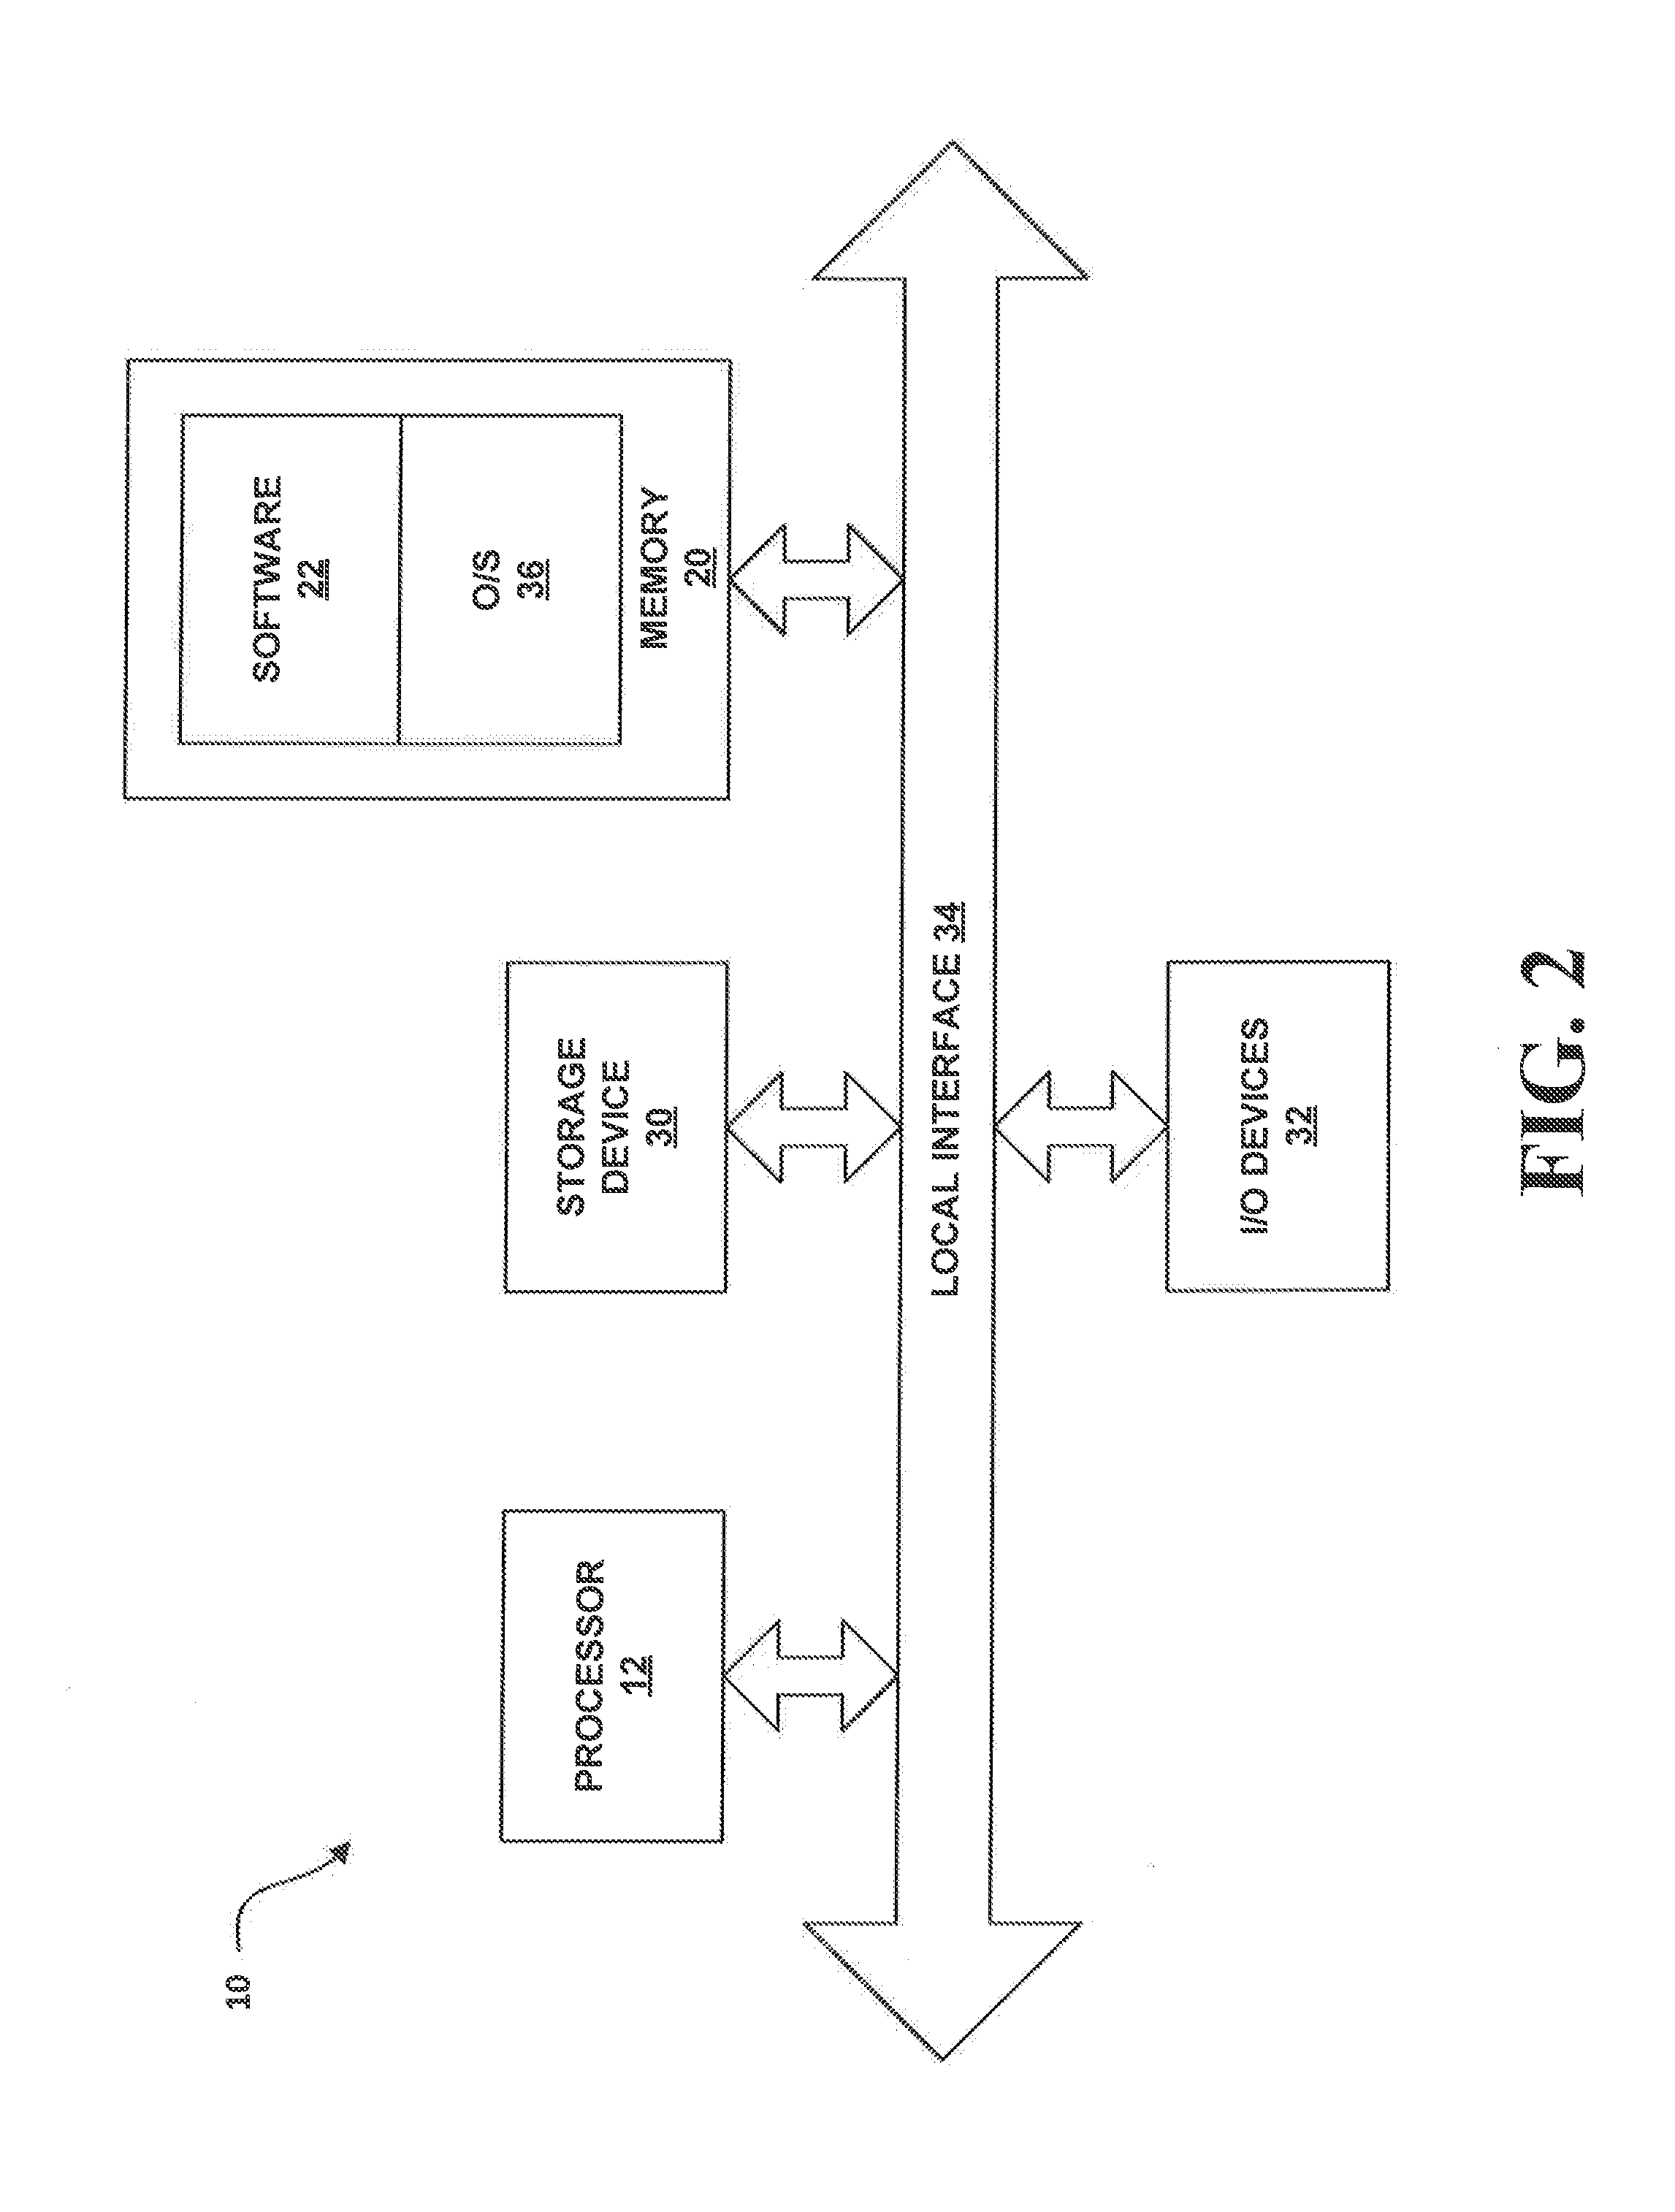 System and method for providing driver behavior classification at intersections and validation on large naturalistic data sets